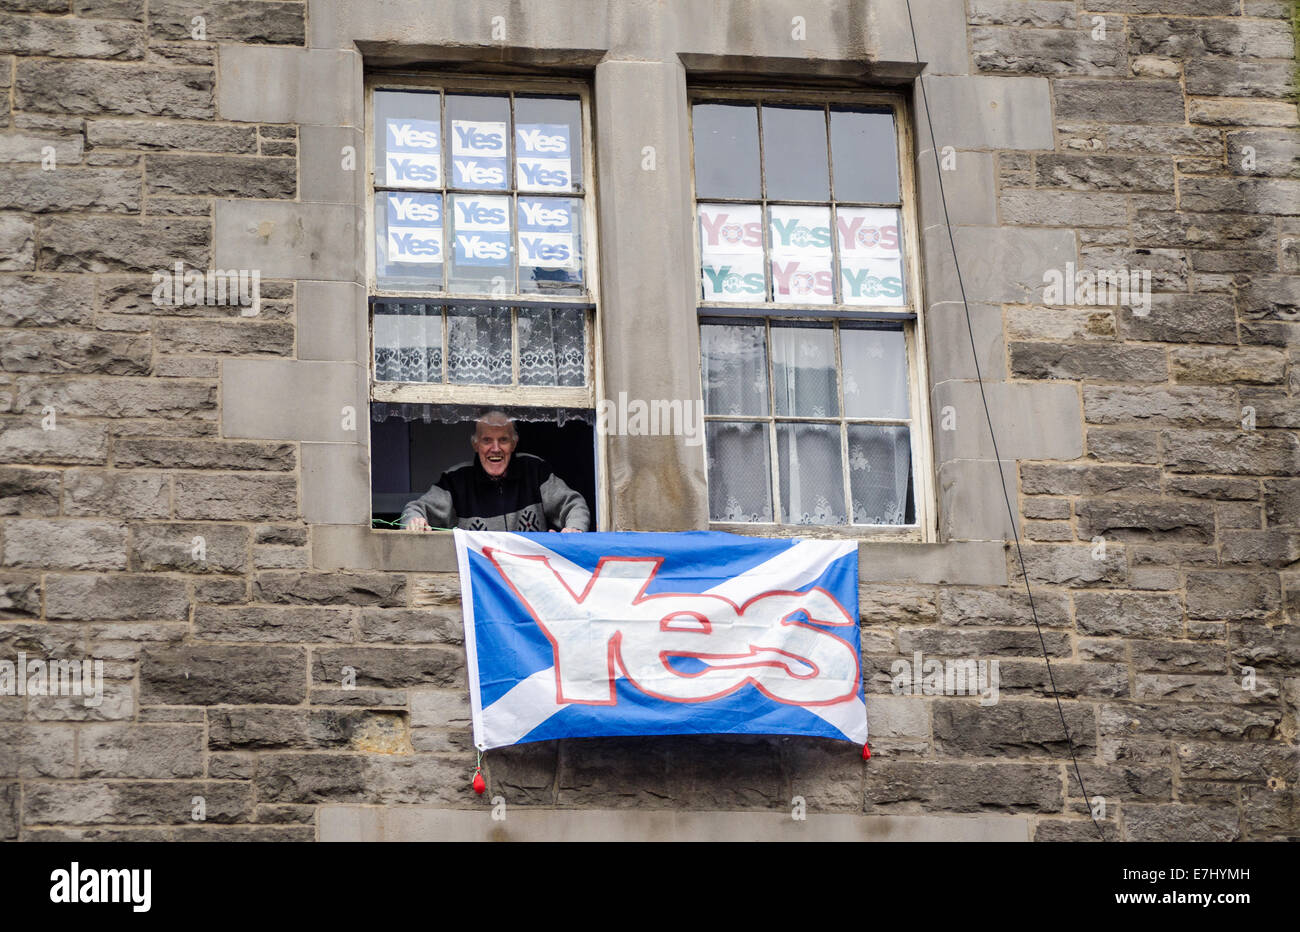 EDINBURGH, SCOTLAND  SEPTEMBER 11, 2014: An older man smiling from the window of his Edinburgh flat with Yes posters. Stock Photo